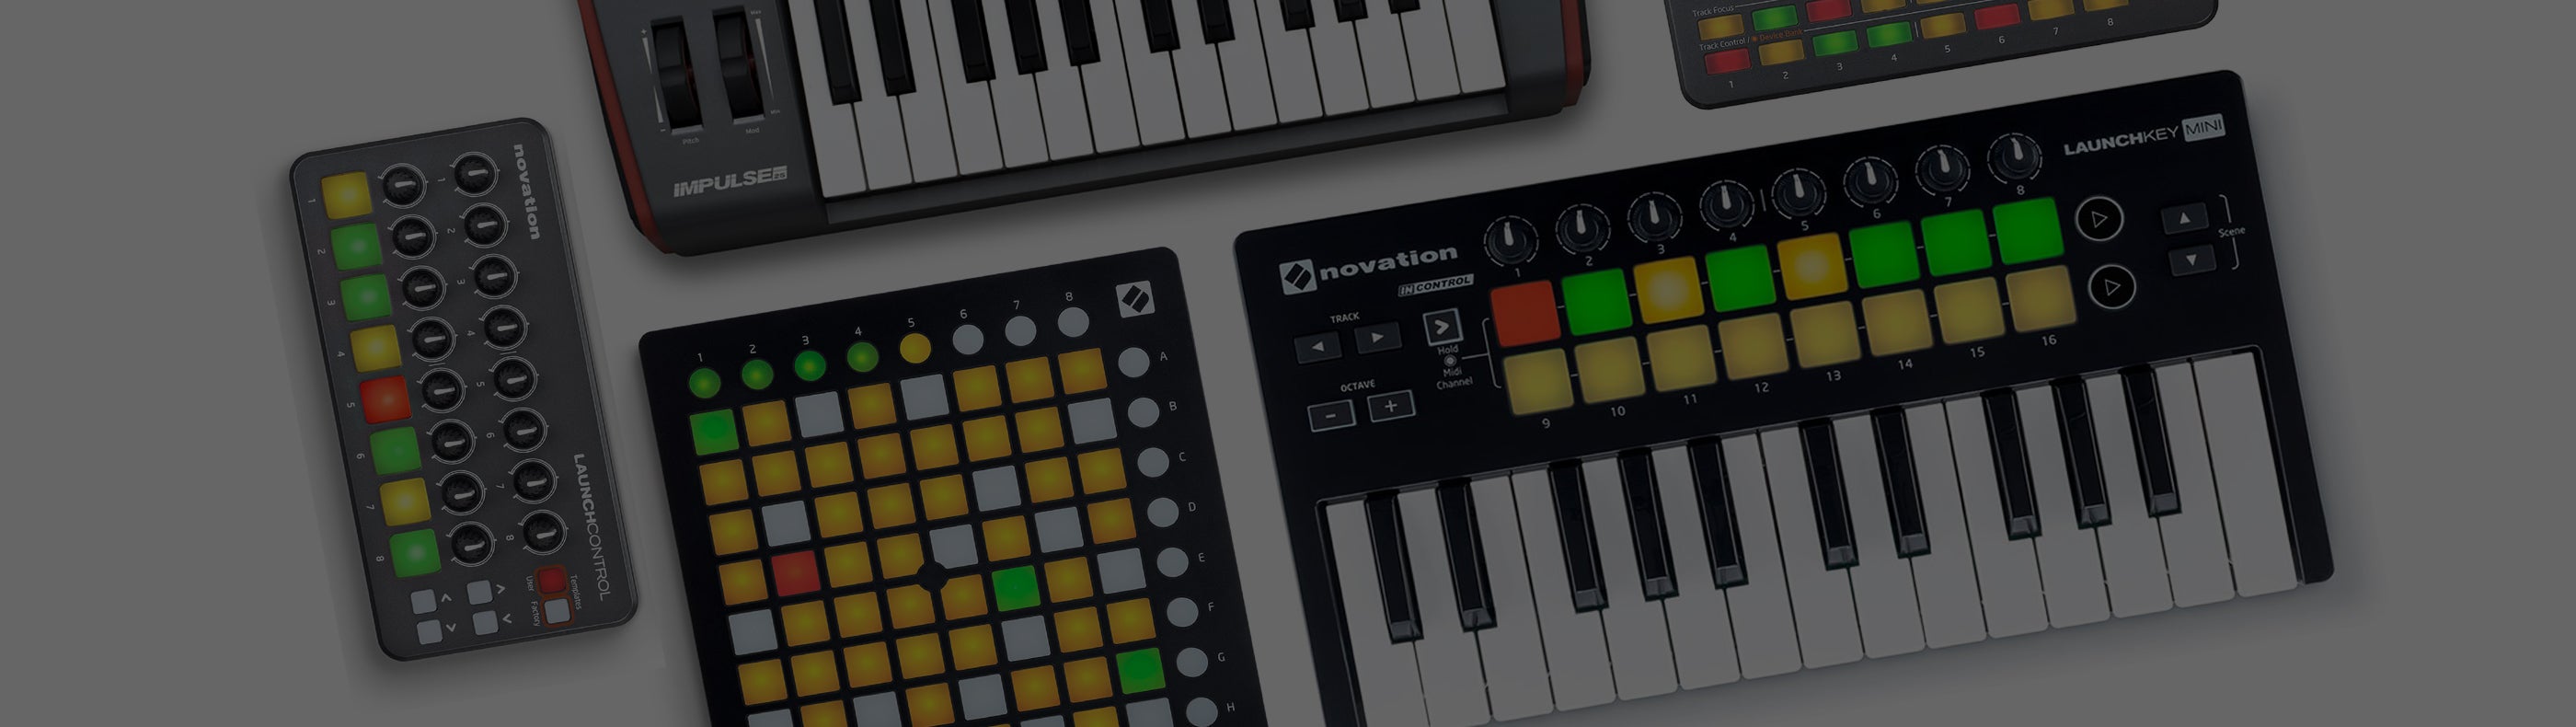 Novation Controllers